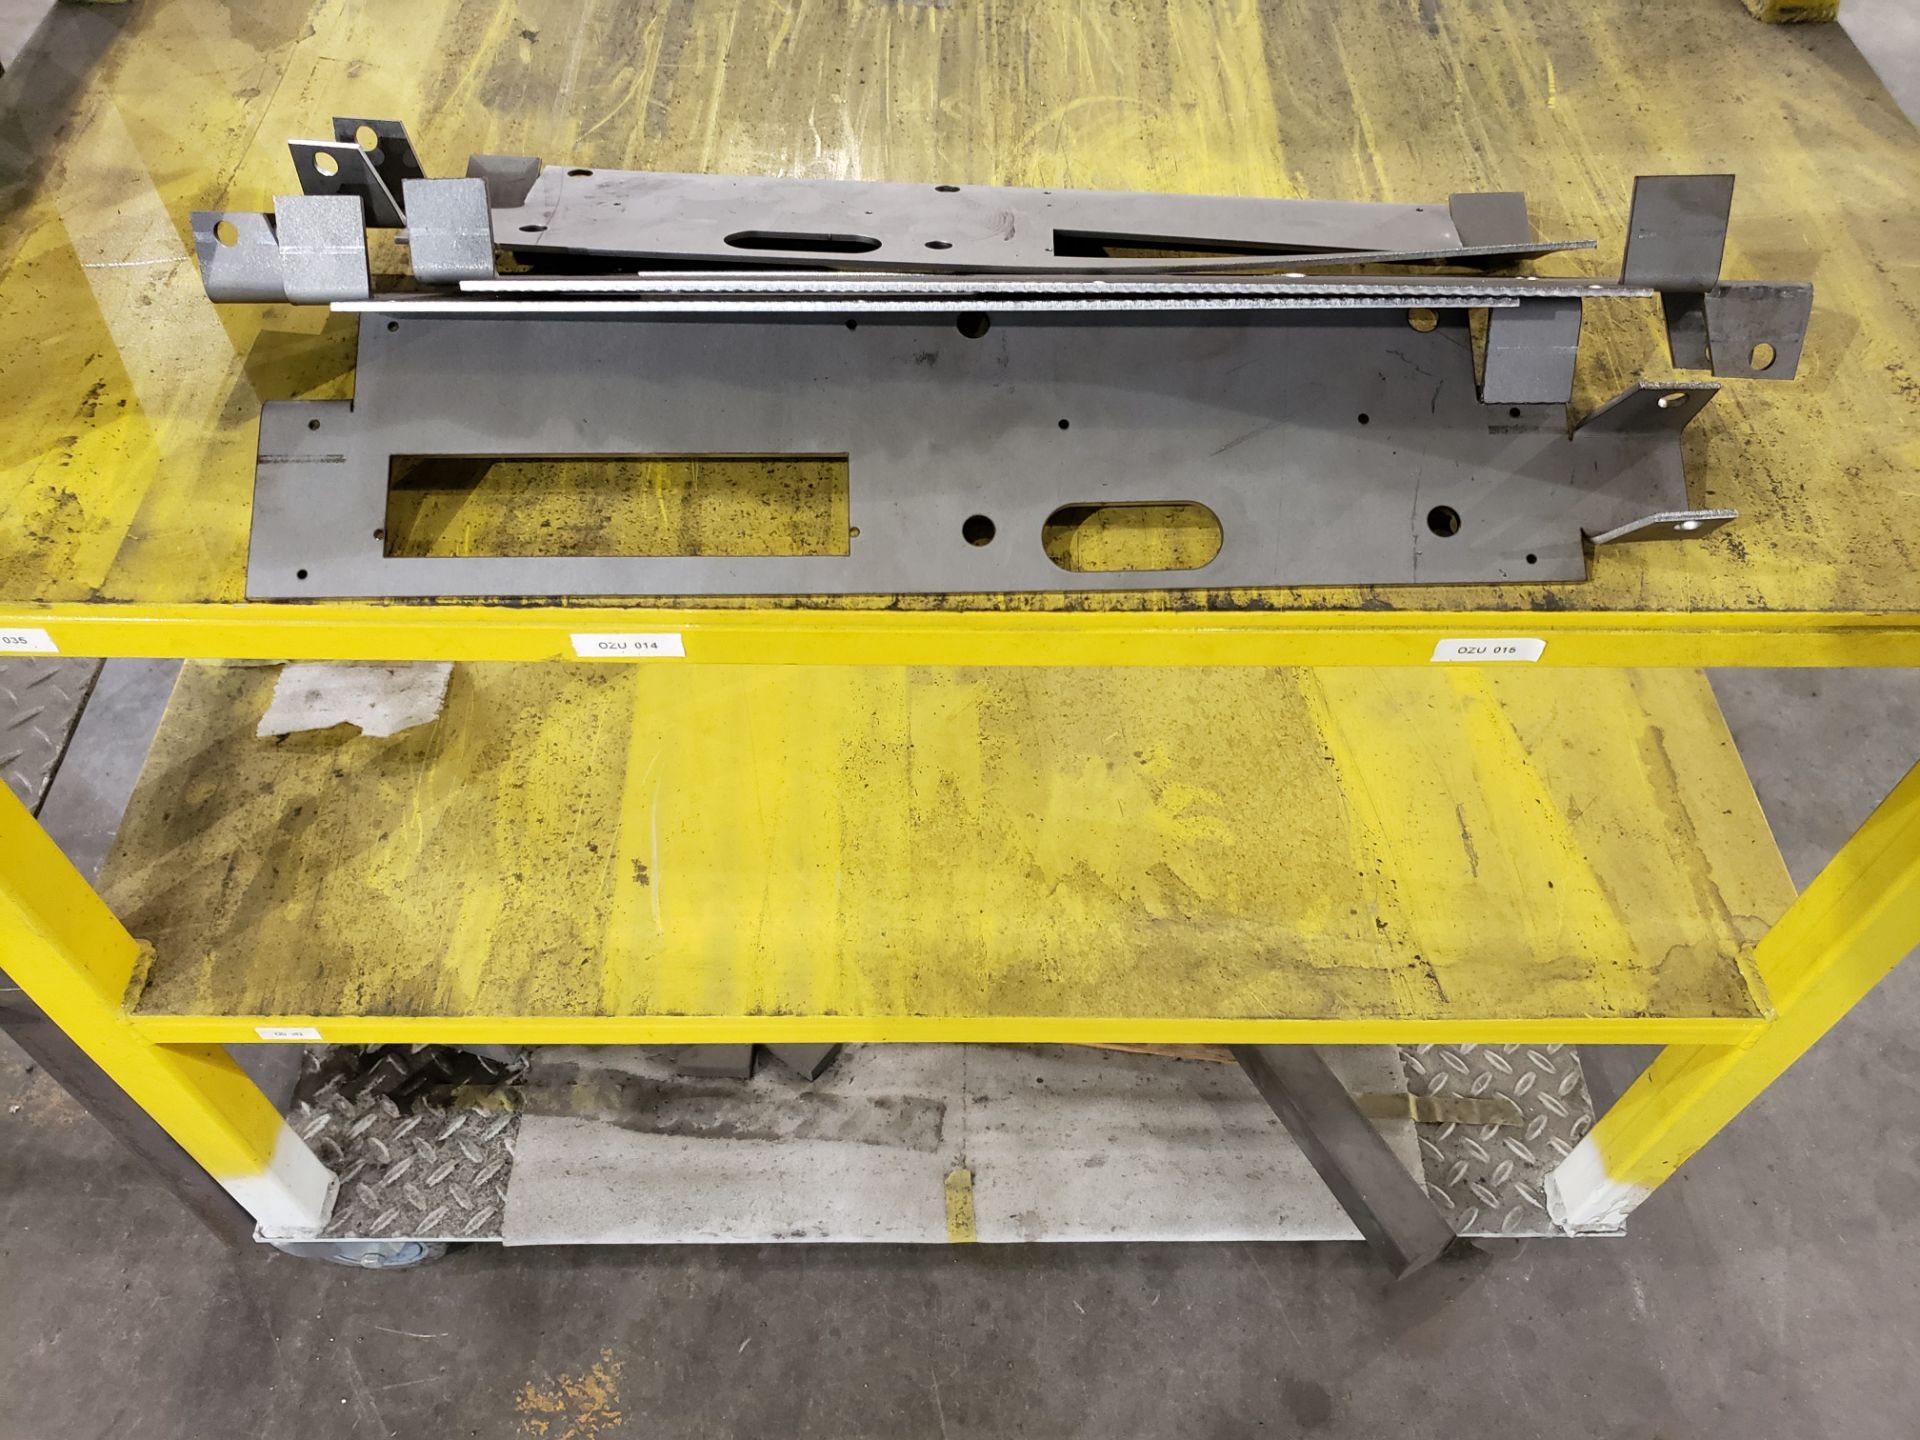 Accupress Press Brake Tooling/Wila Tool Package - Image 8 of 9